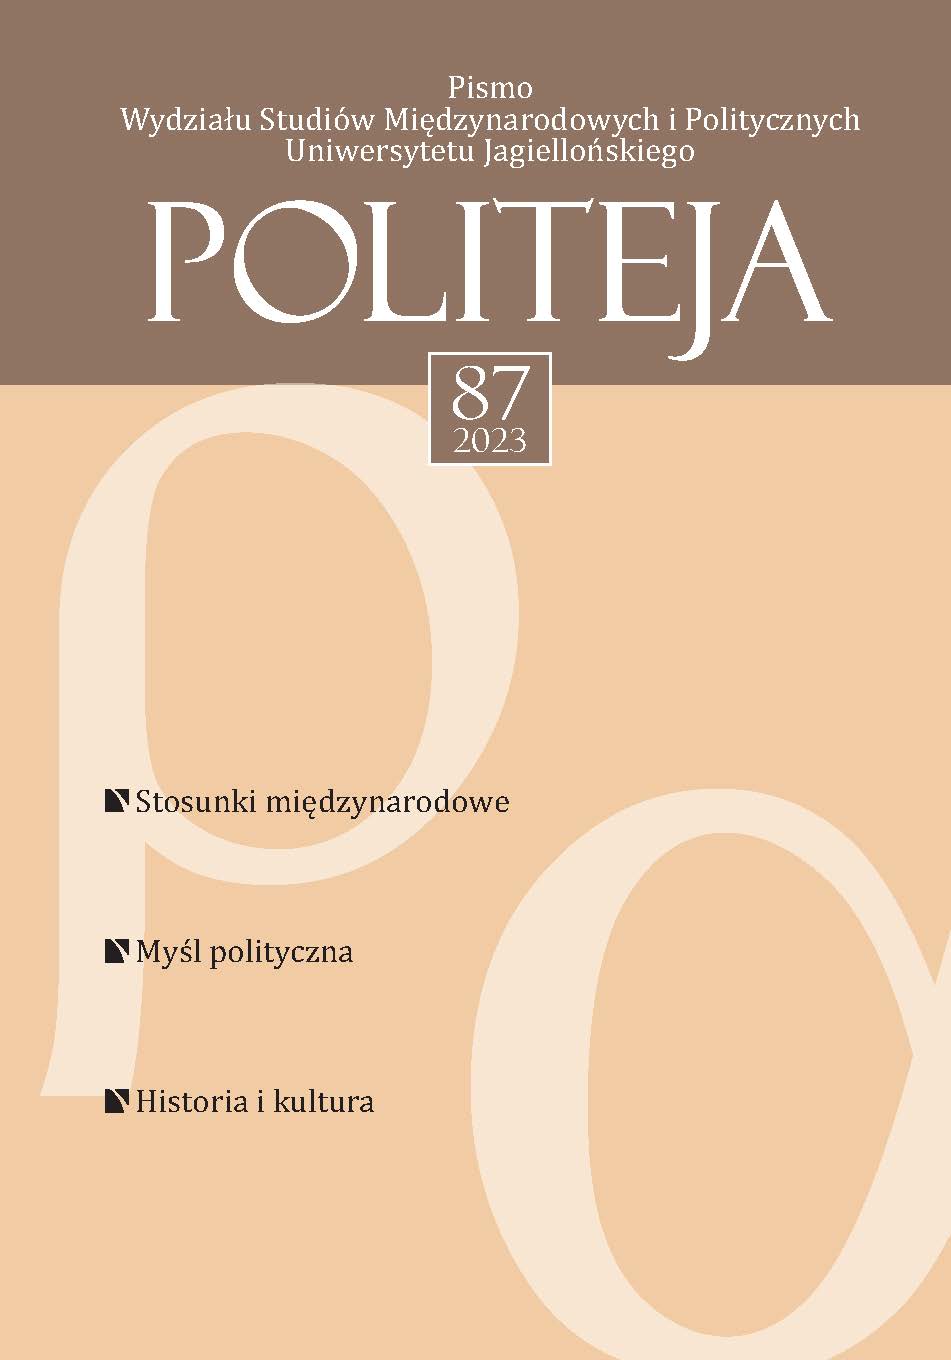 European Heritage Label-based Education as an Essential Part of Memory Education – The Polish Case Cover Image